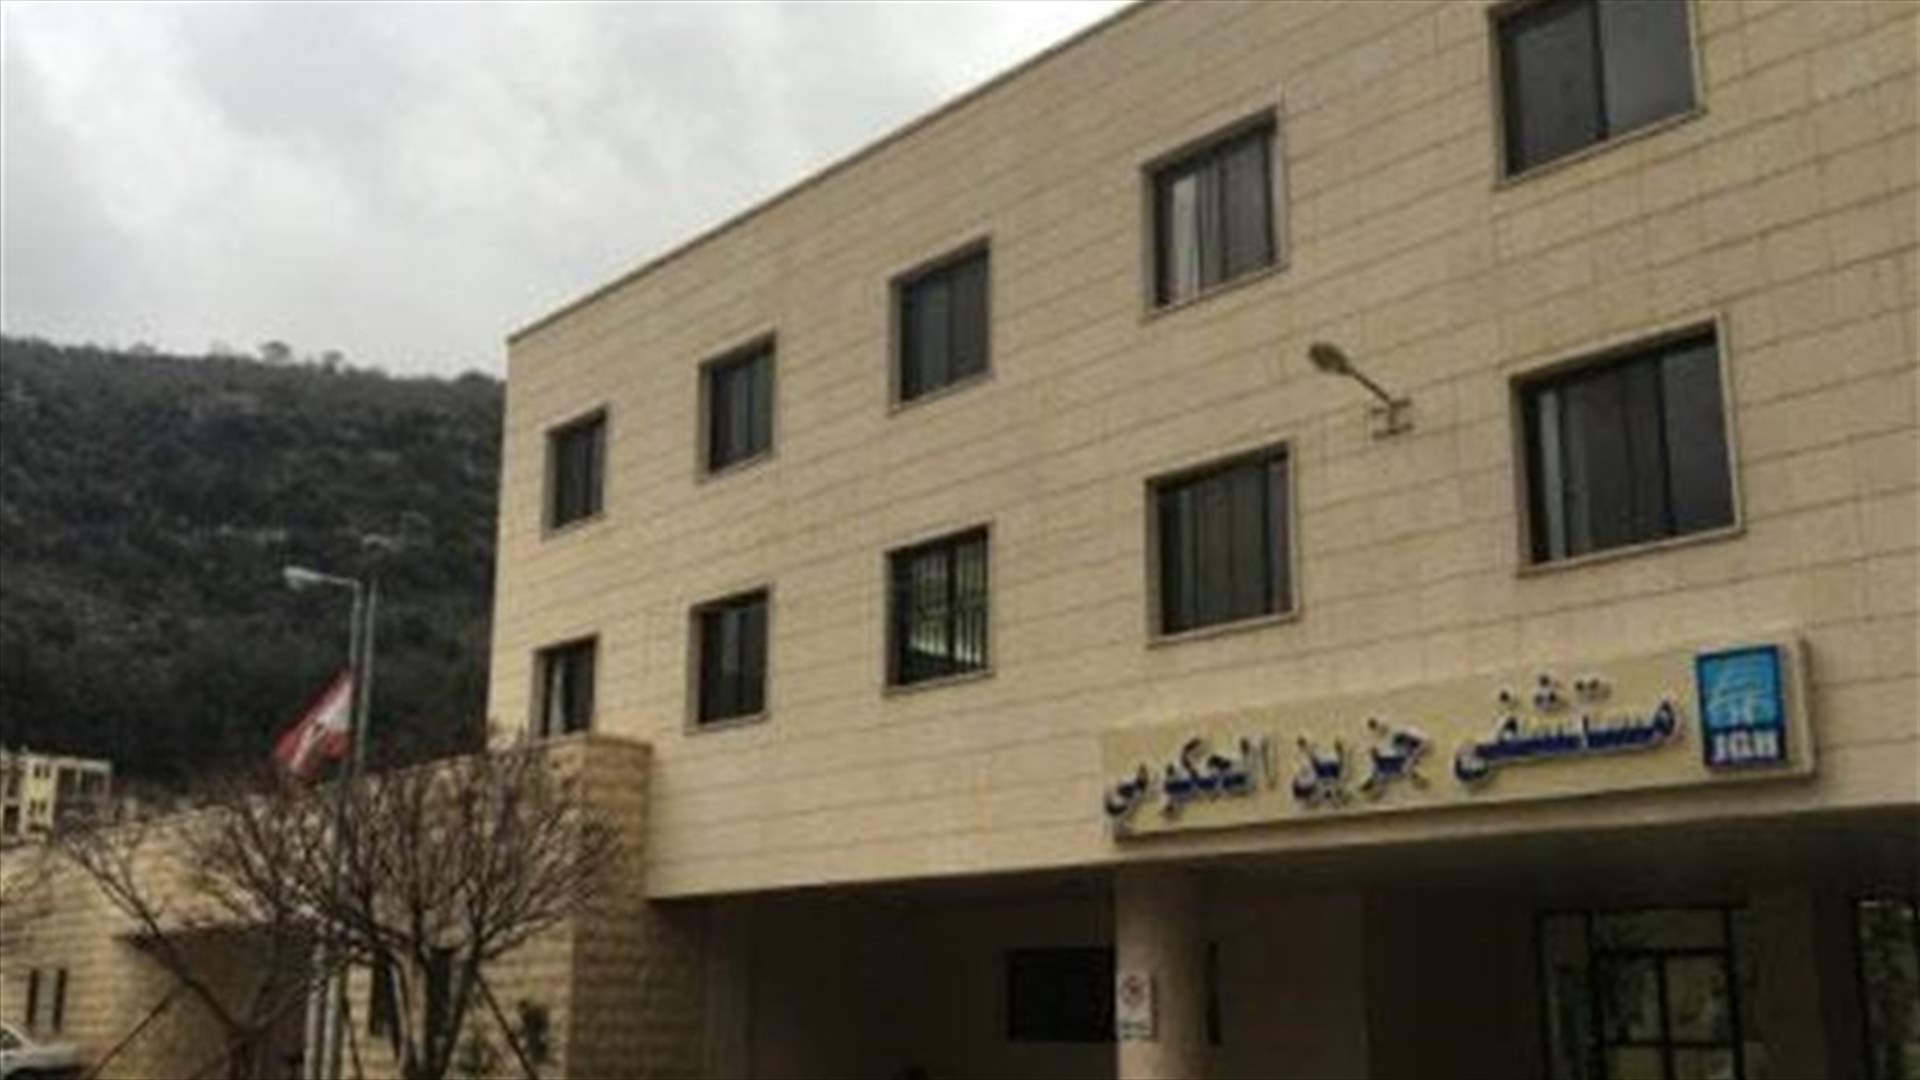 Jezzine Hospital declares strike, stops admitting patients, except dialysis and emergency cases